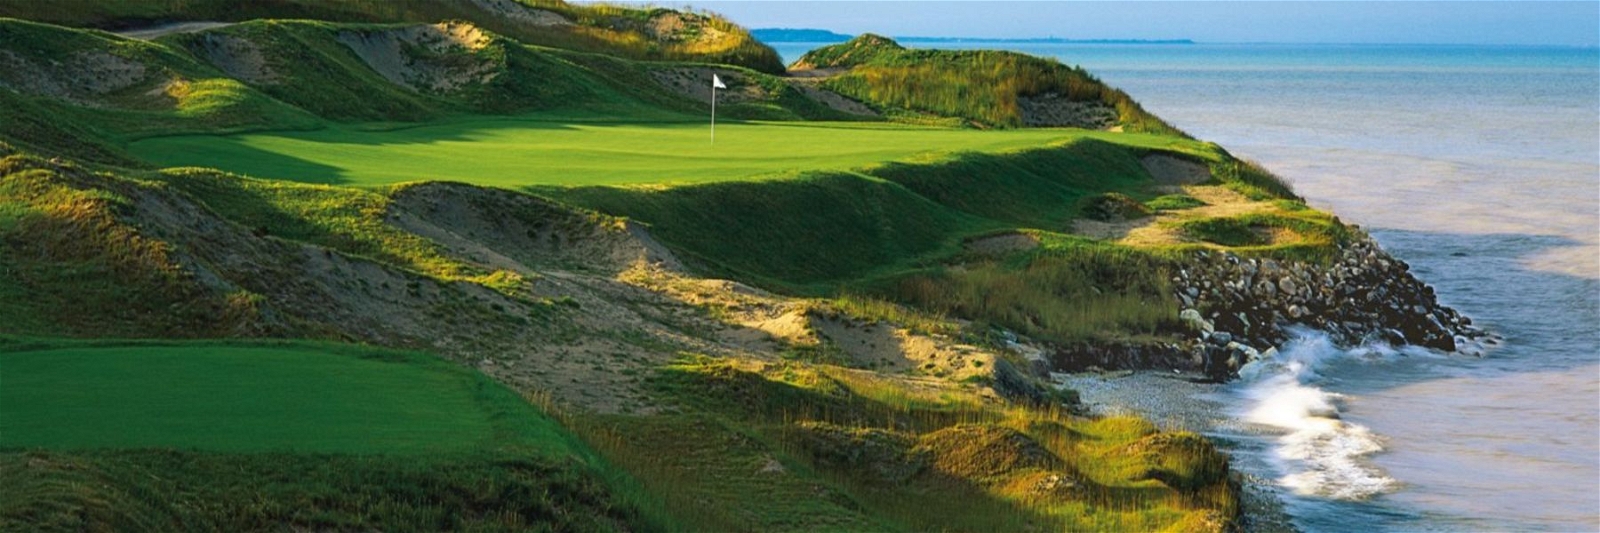 Golf Vacation Package - Whistling Straits Golf Club - Straits Course